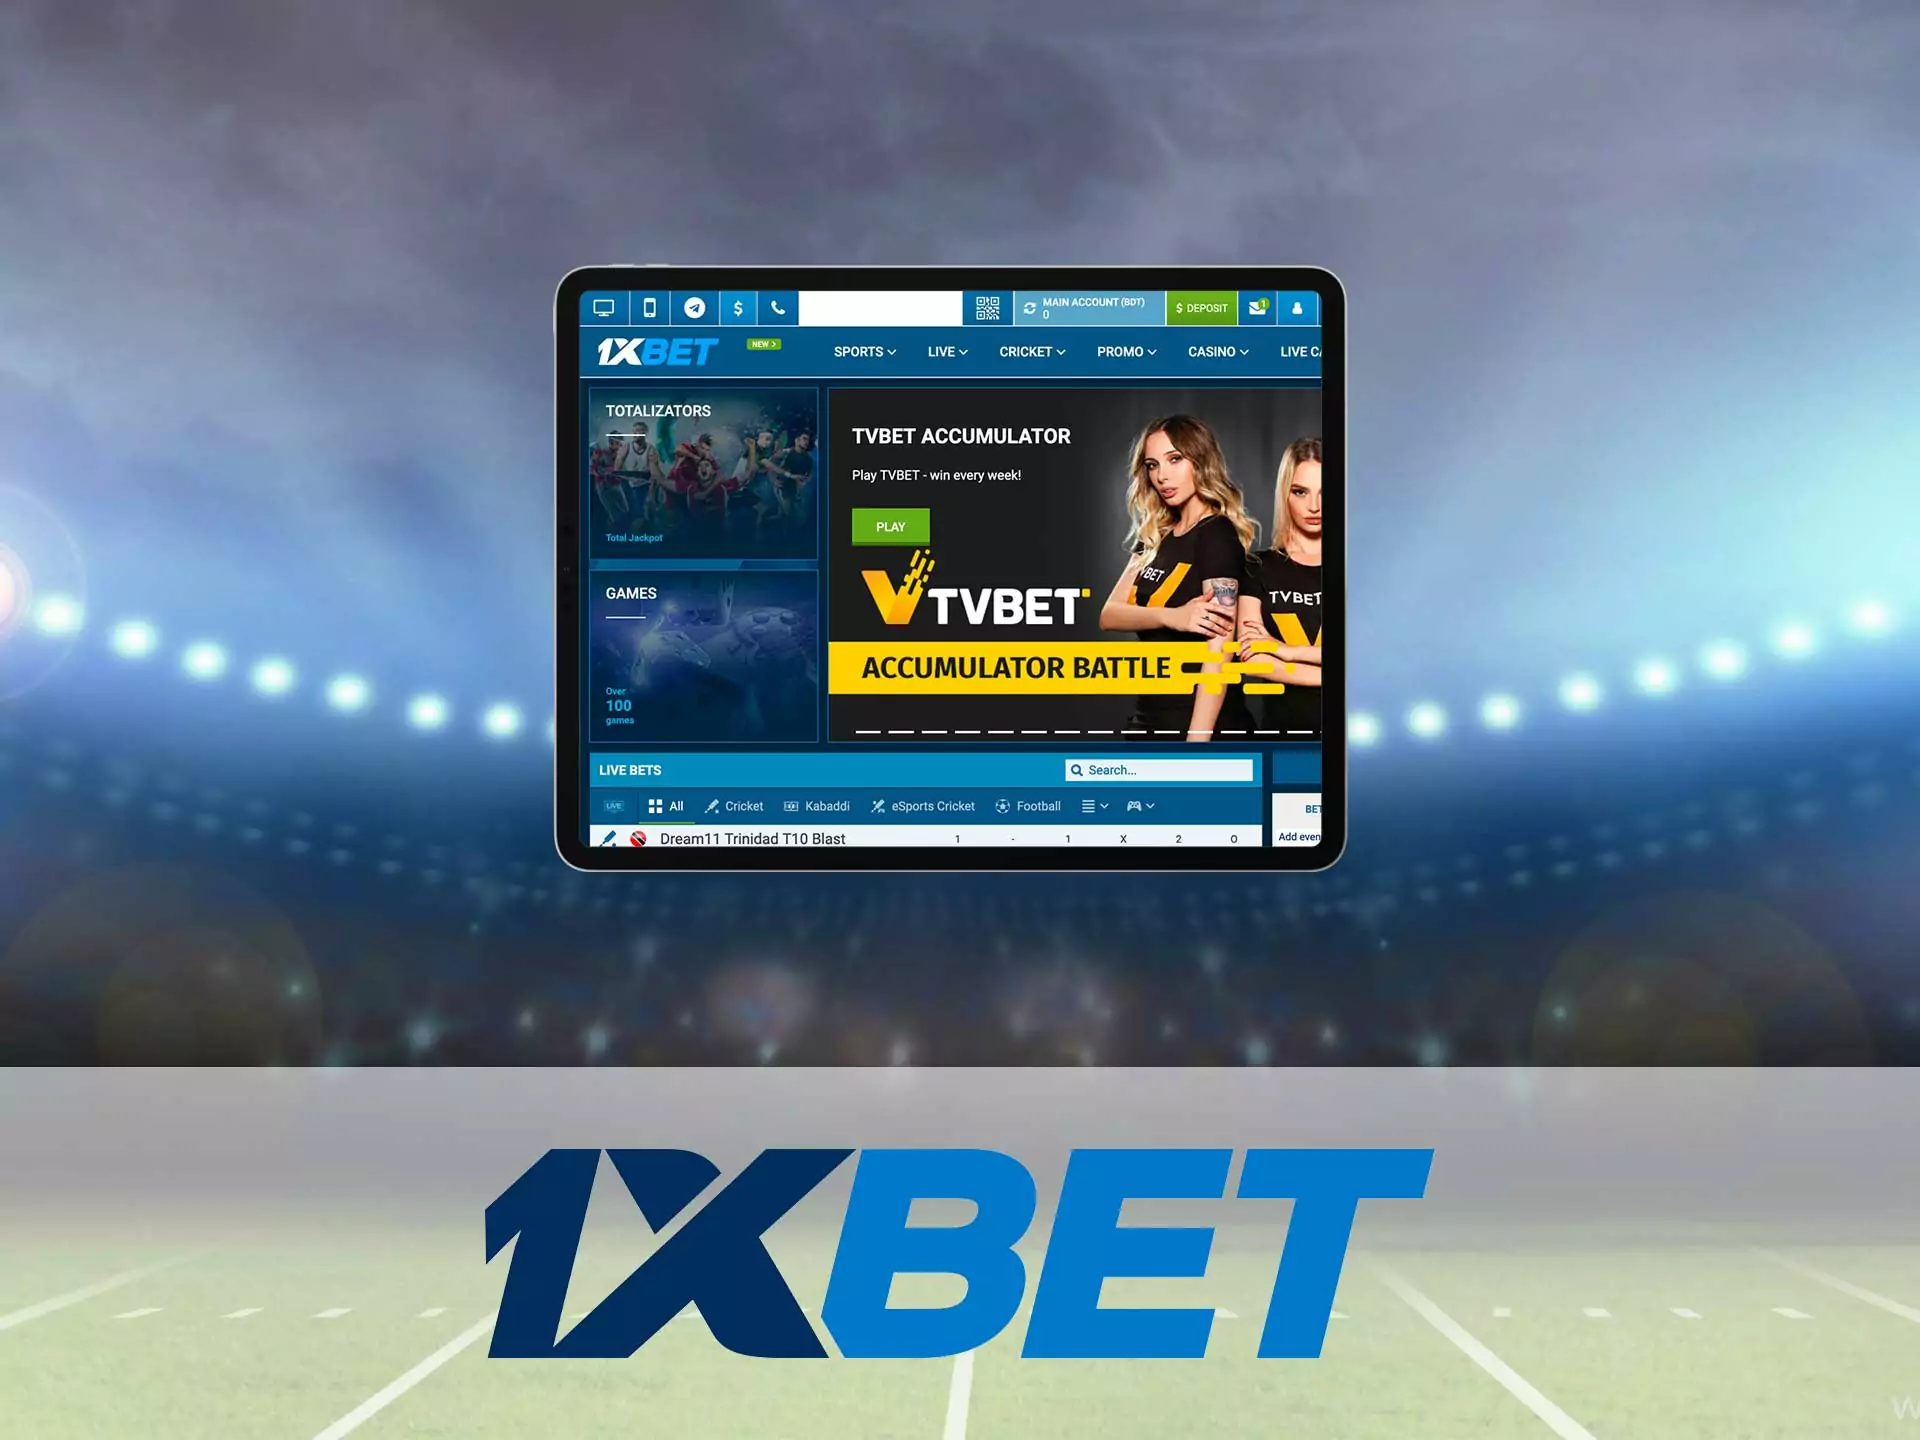 Cricket betting application - it is fast, convenient, and full of diverse events and additional options.